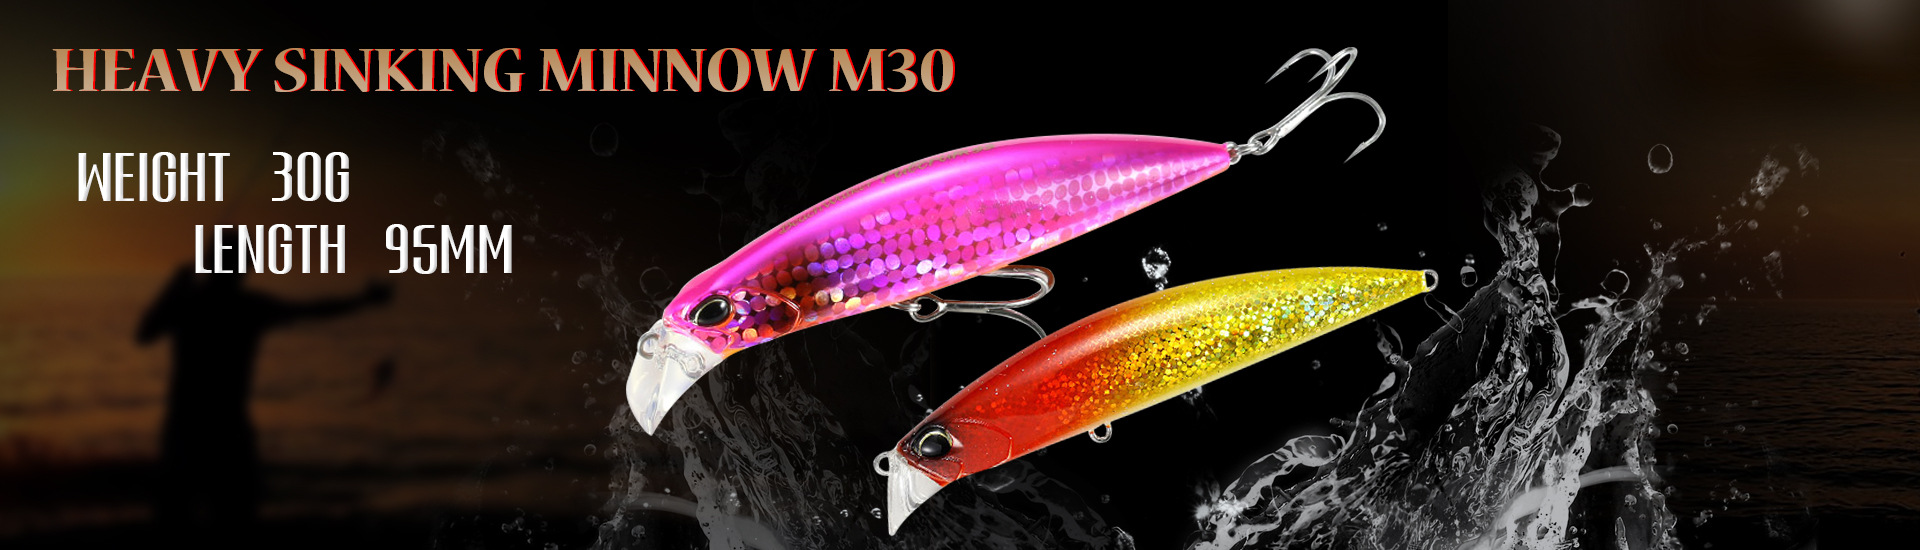 Sinking Minnow Fishing Lures 105mm 30g Haed Baits Fresh Water Bass Swimbait Tackle Gear